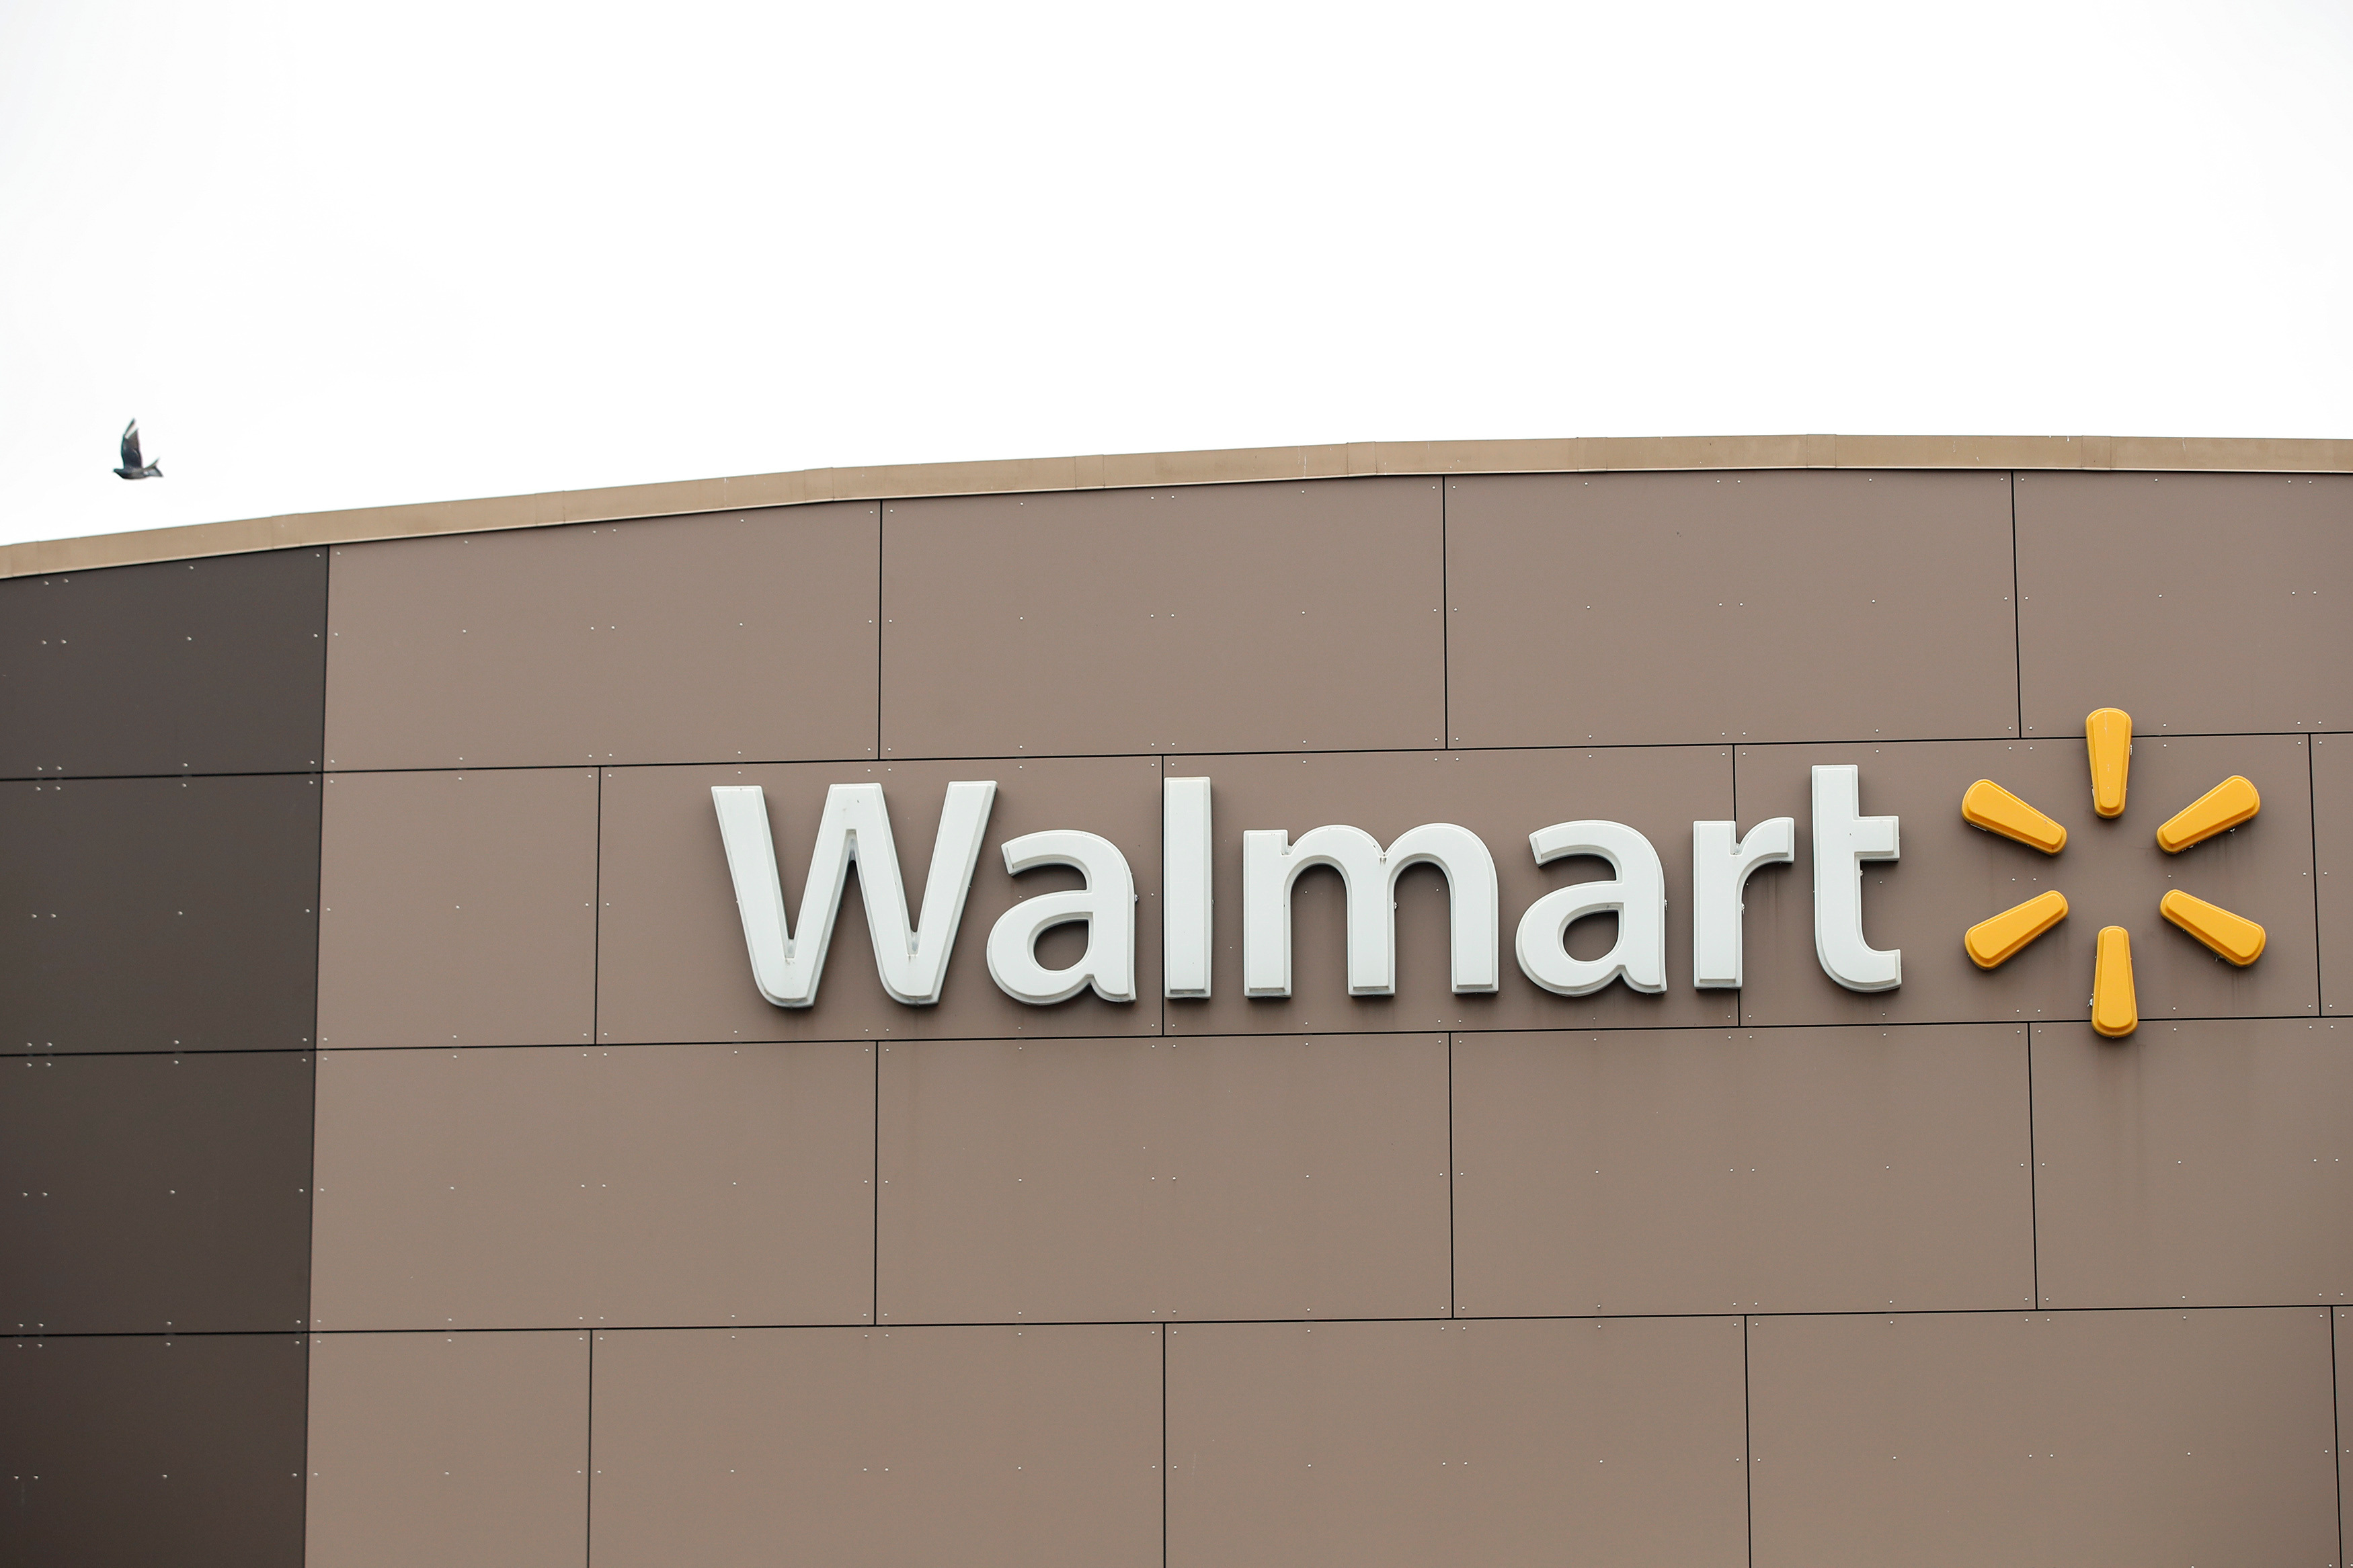 15 Walmart in Las Vegas NV – Store Hours, Address and More